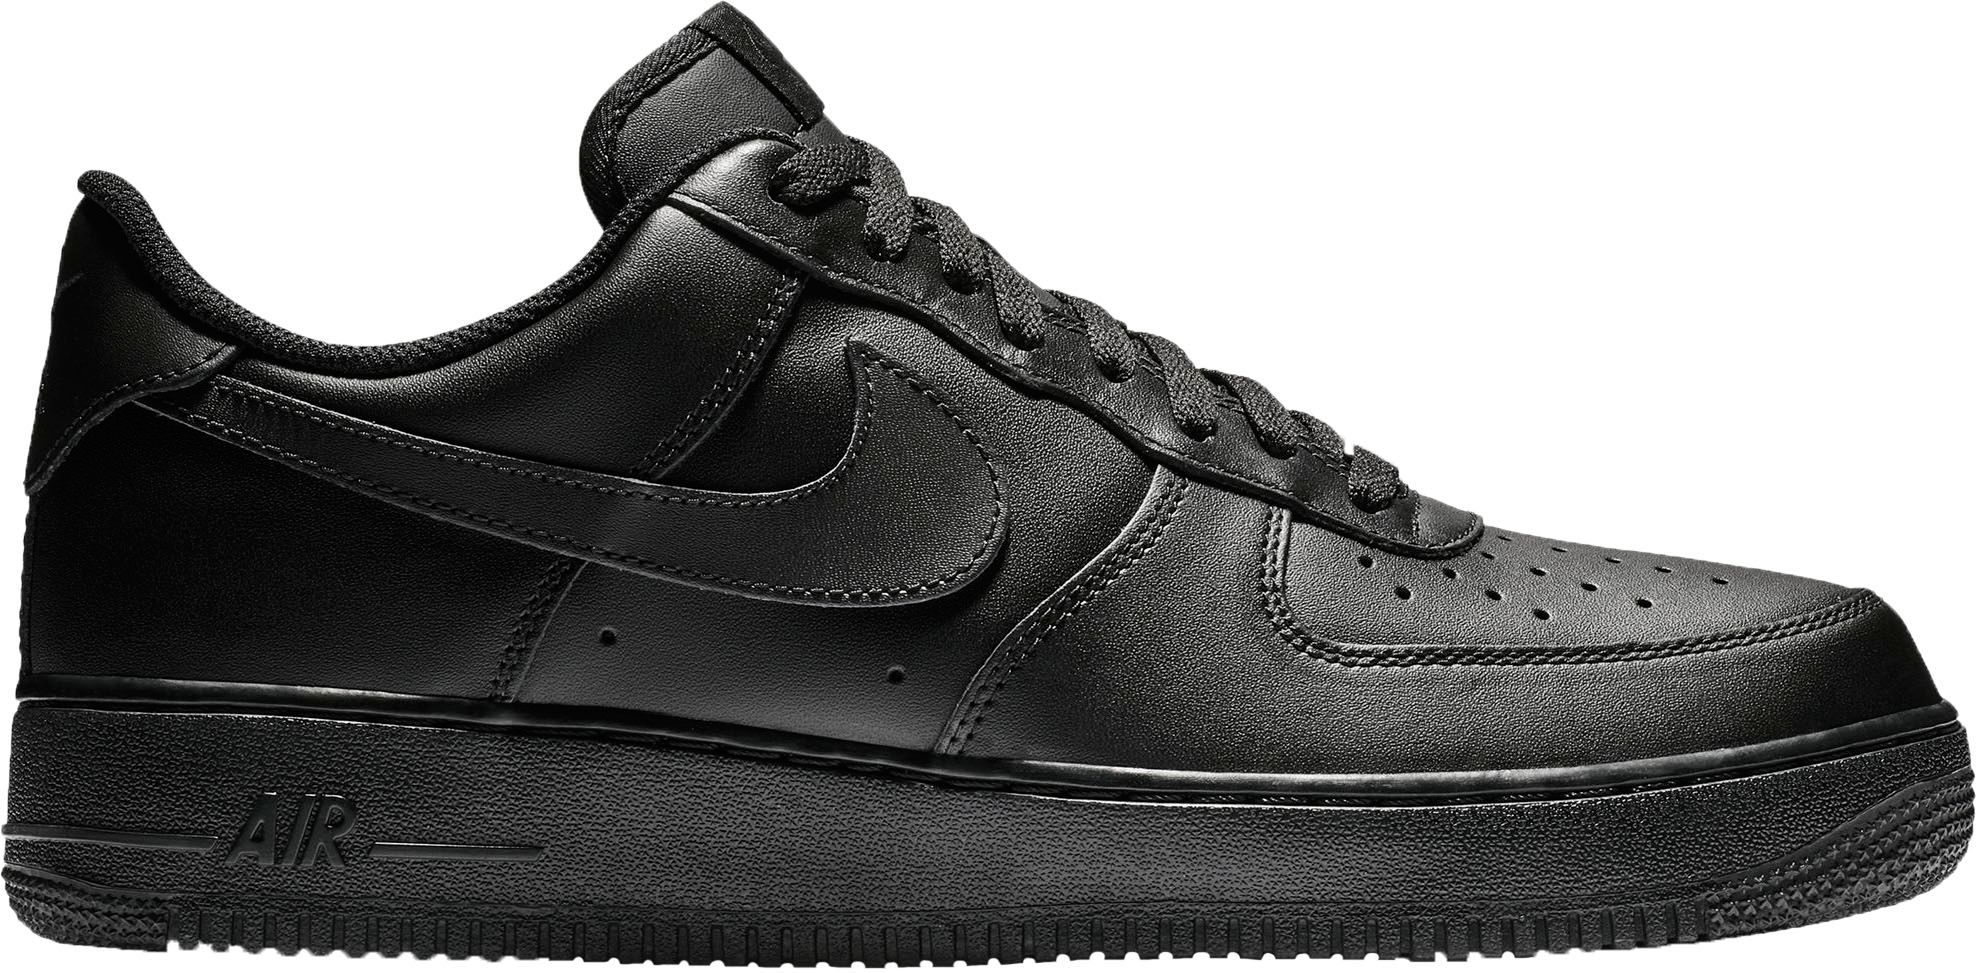 cheapest place to buy air force ones